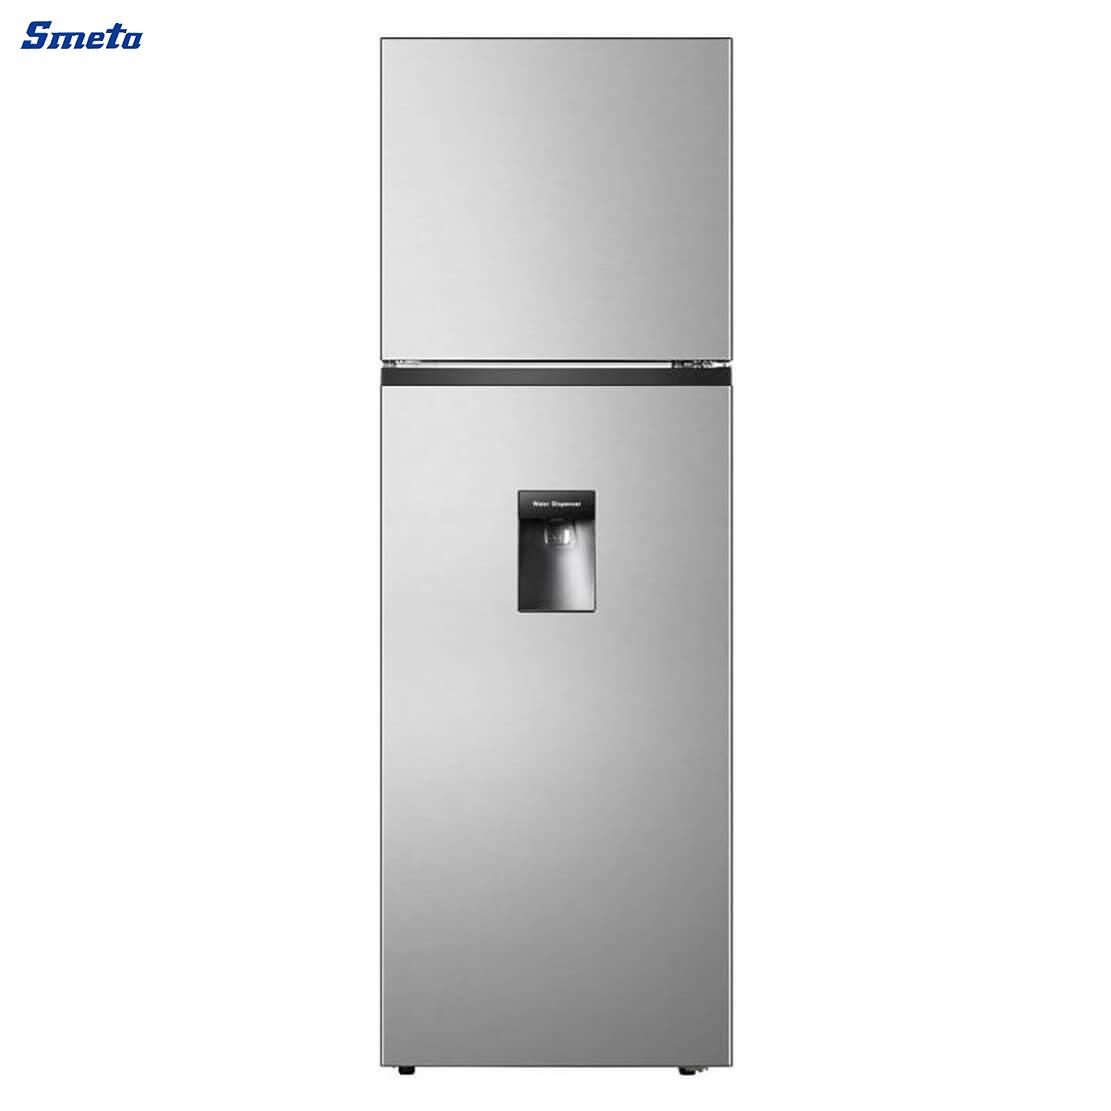 320L Top Freezer Stainless Steel Fridge with Water Dispenser